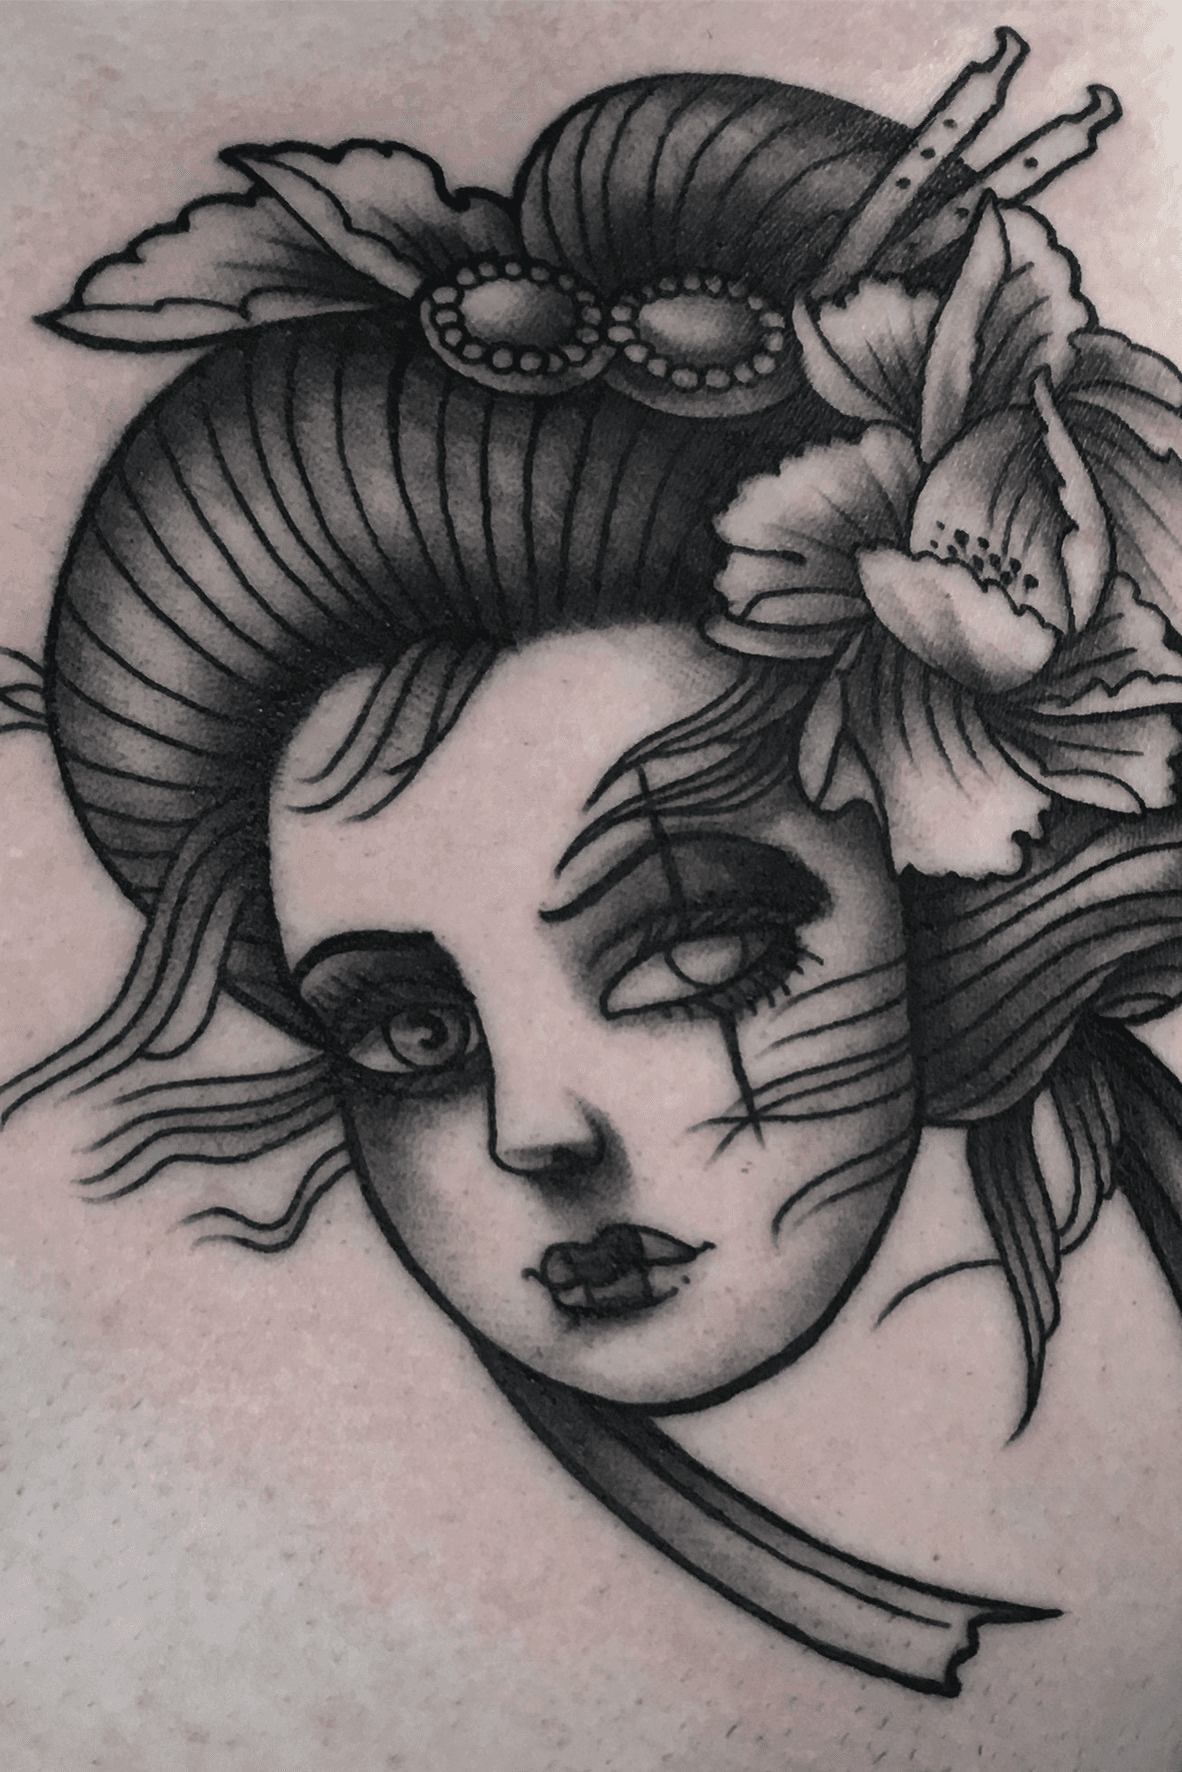 15 Best Geisha Tattoo Designs With Images | Styles At Life